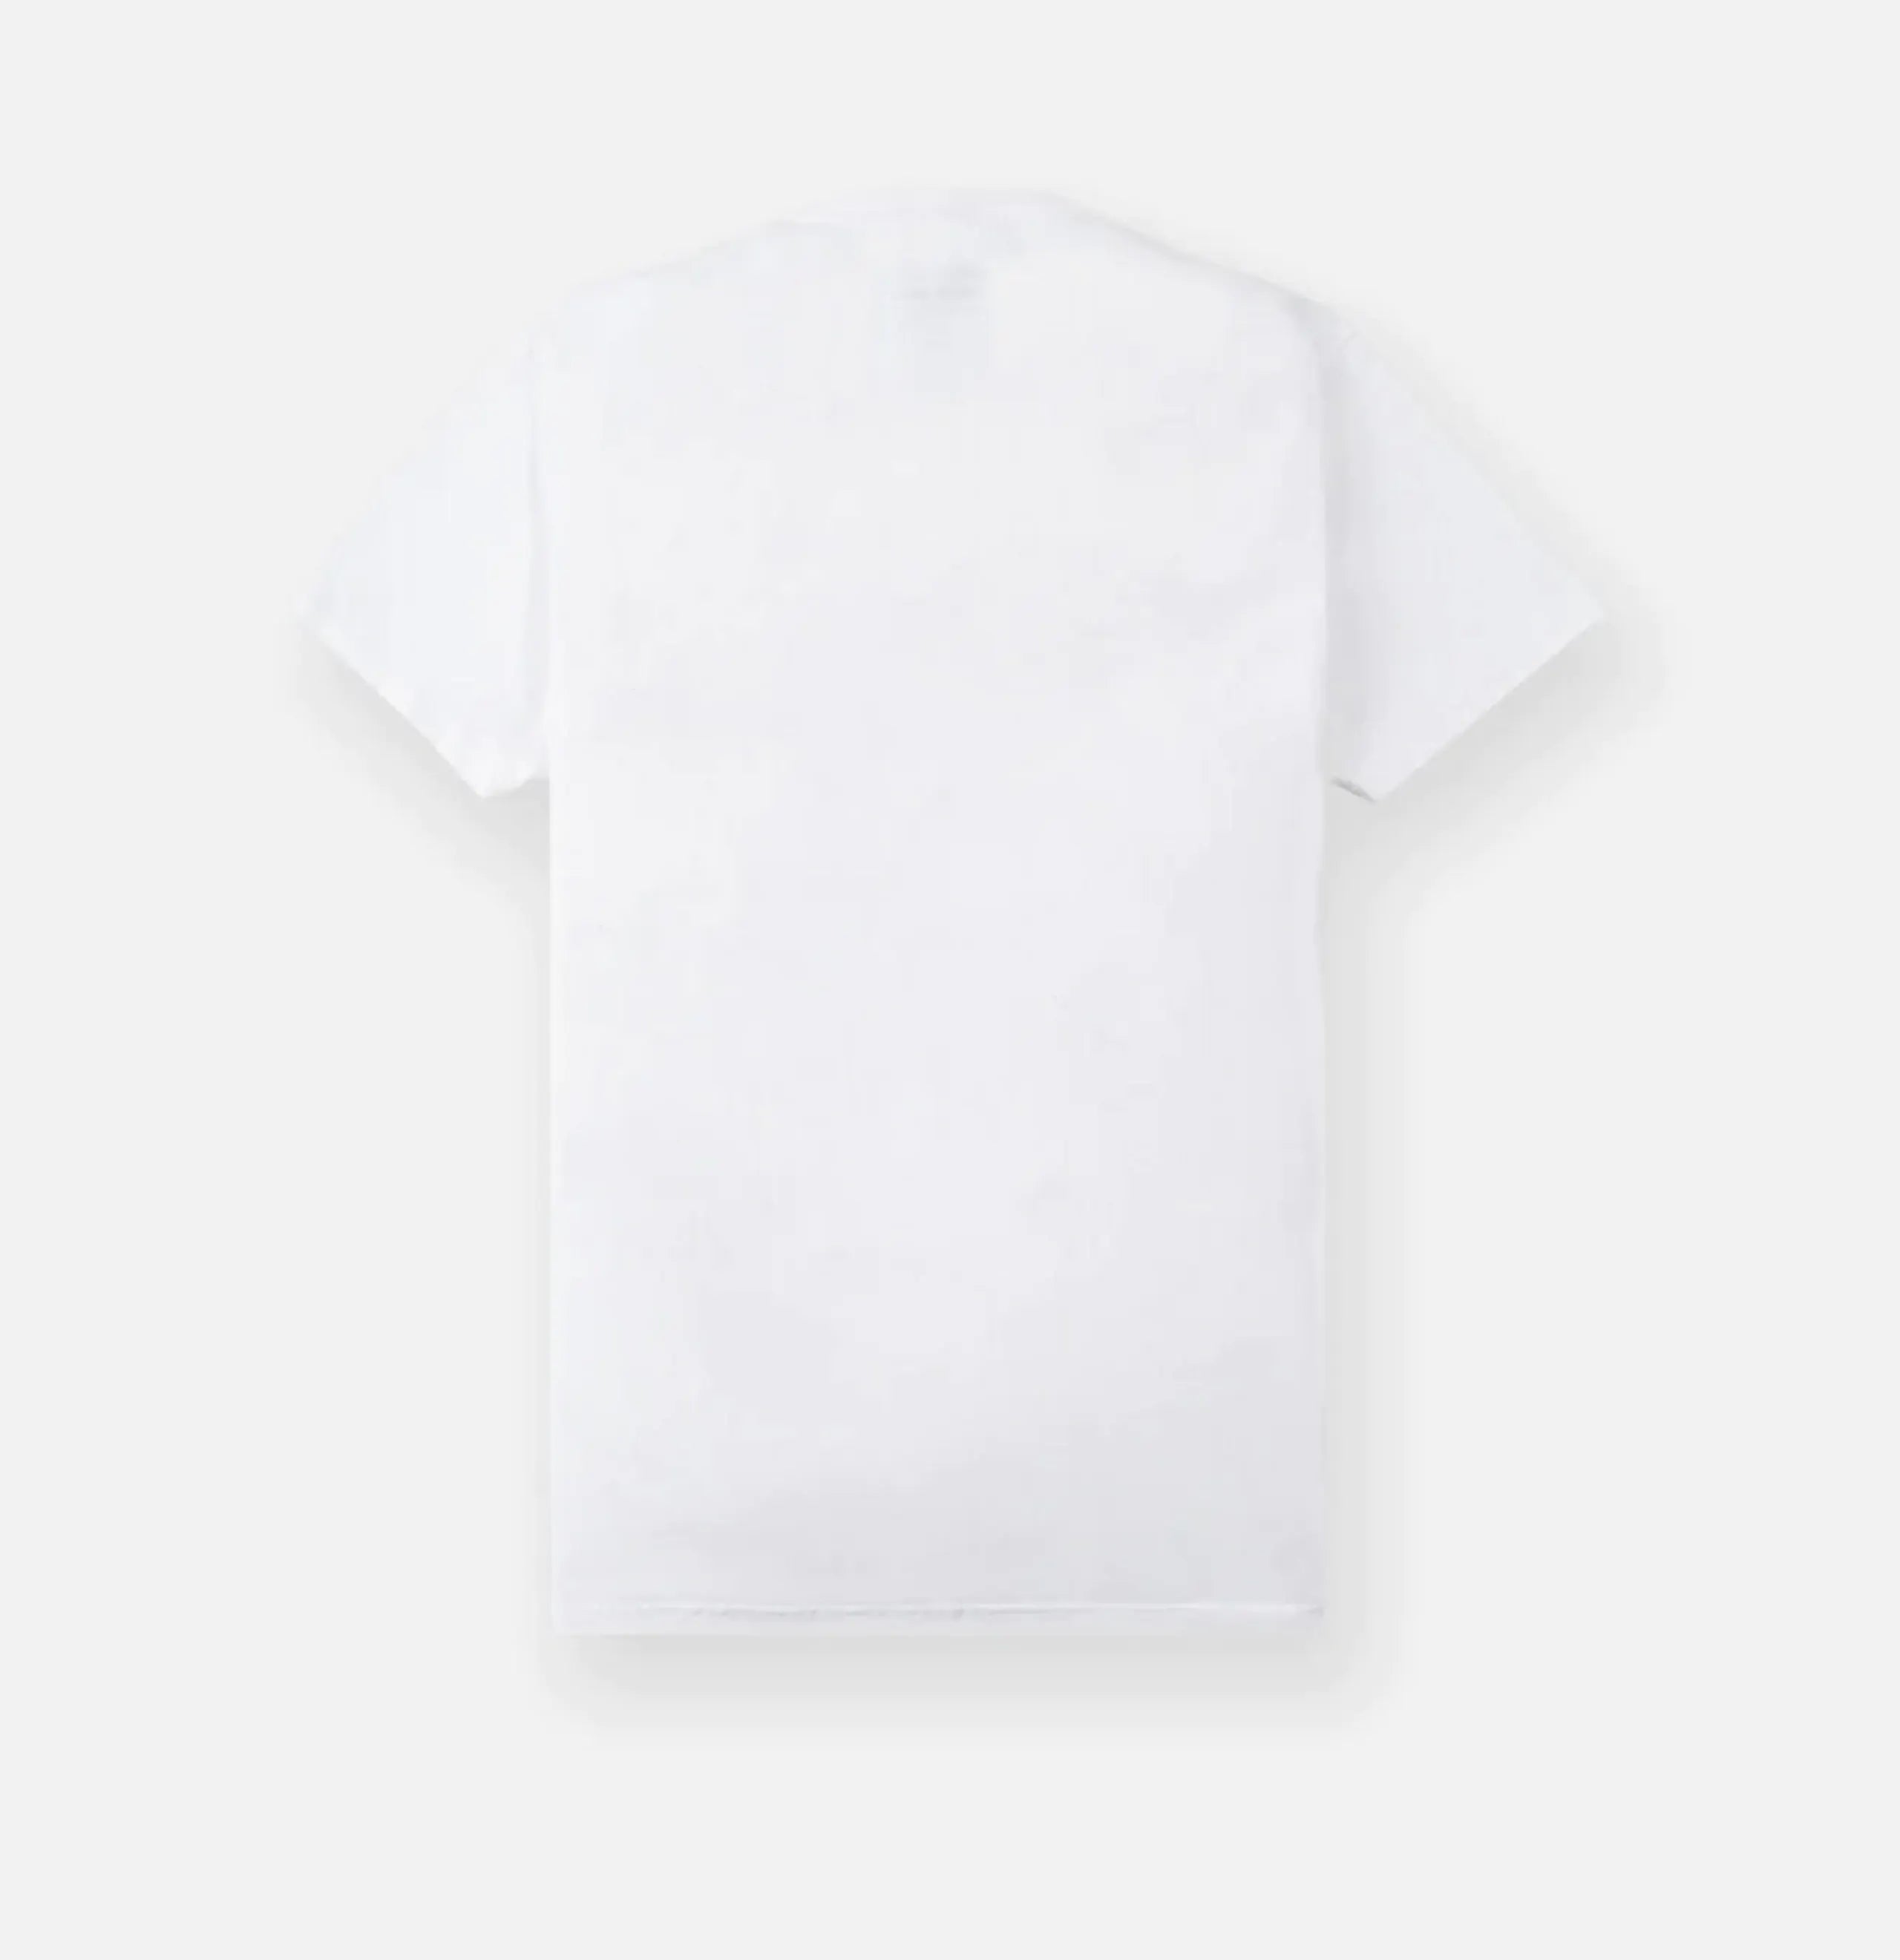 PAPER PLANES PATH TO GREATNESS LOGO TEE - Gravity NYC